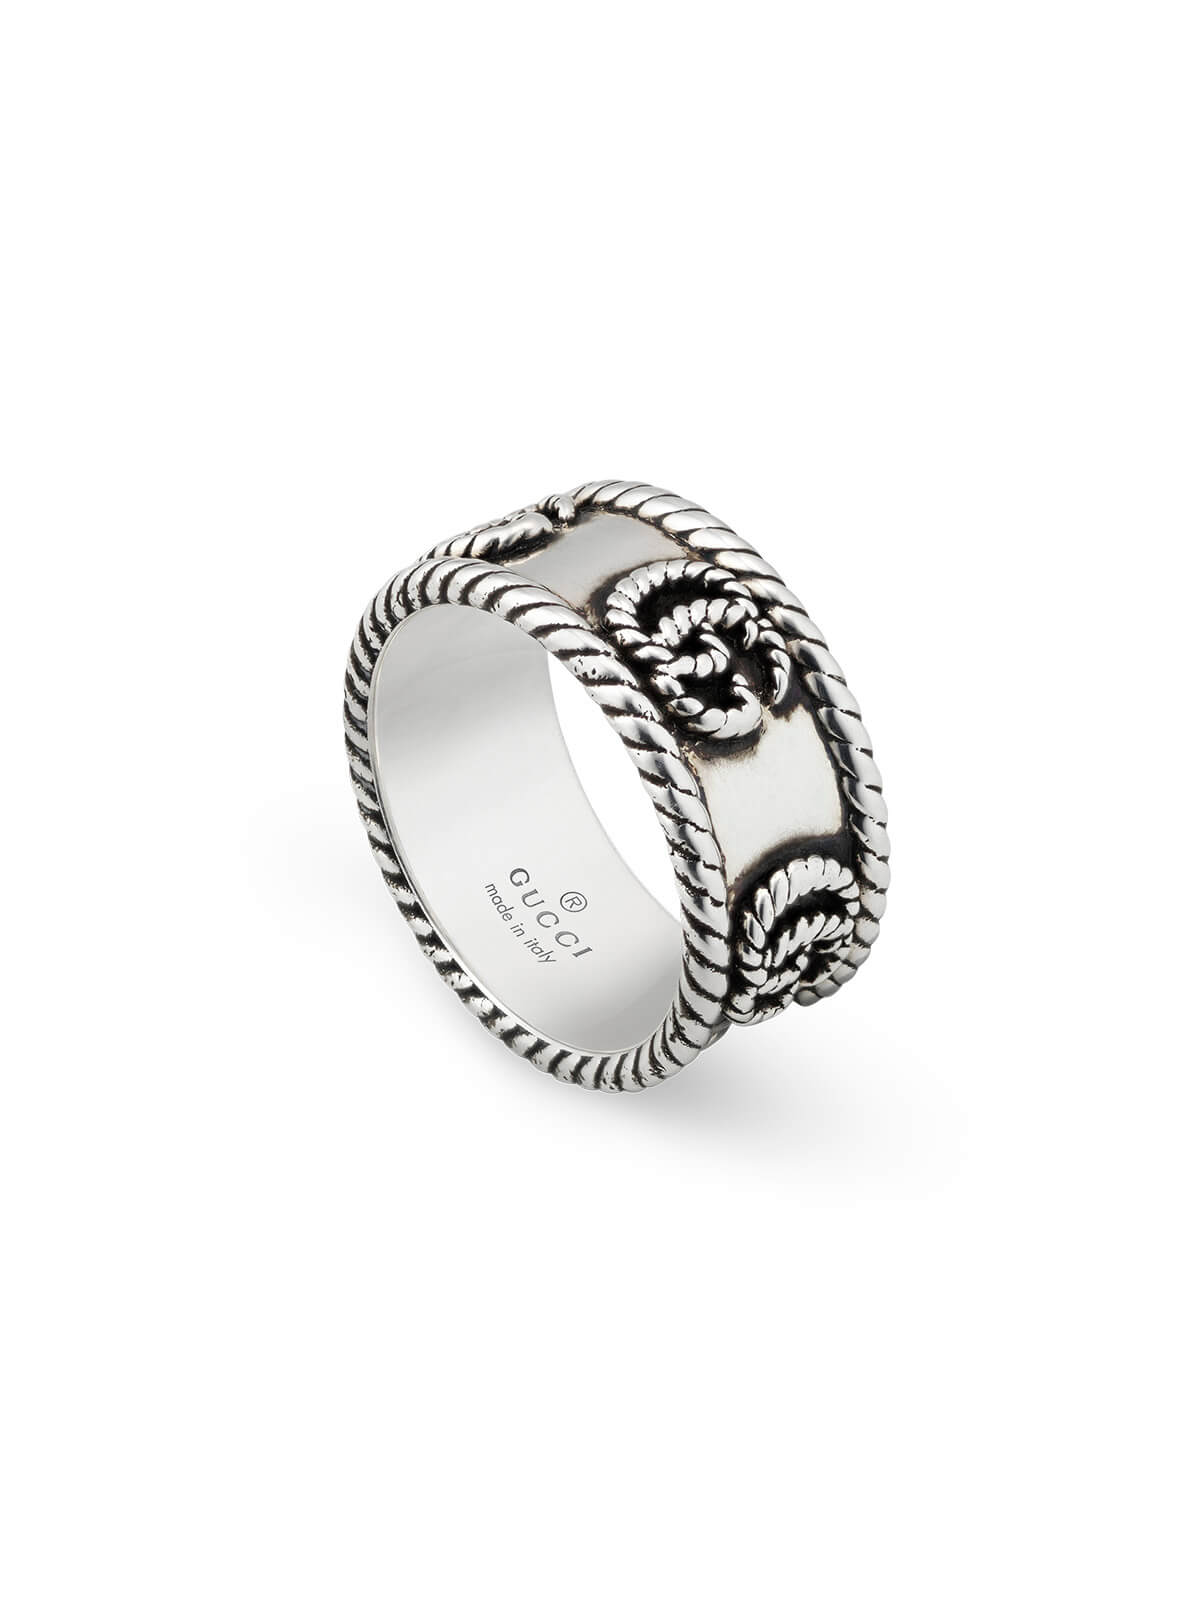 Gucci GG Marmont Ring in Silver - Size P YBC627729001016